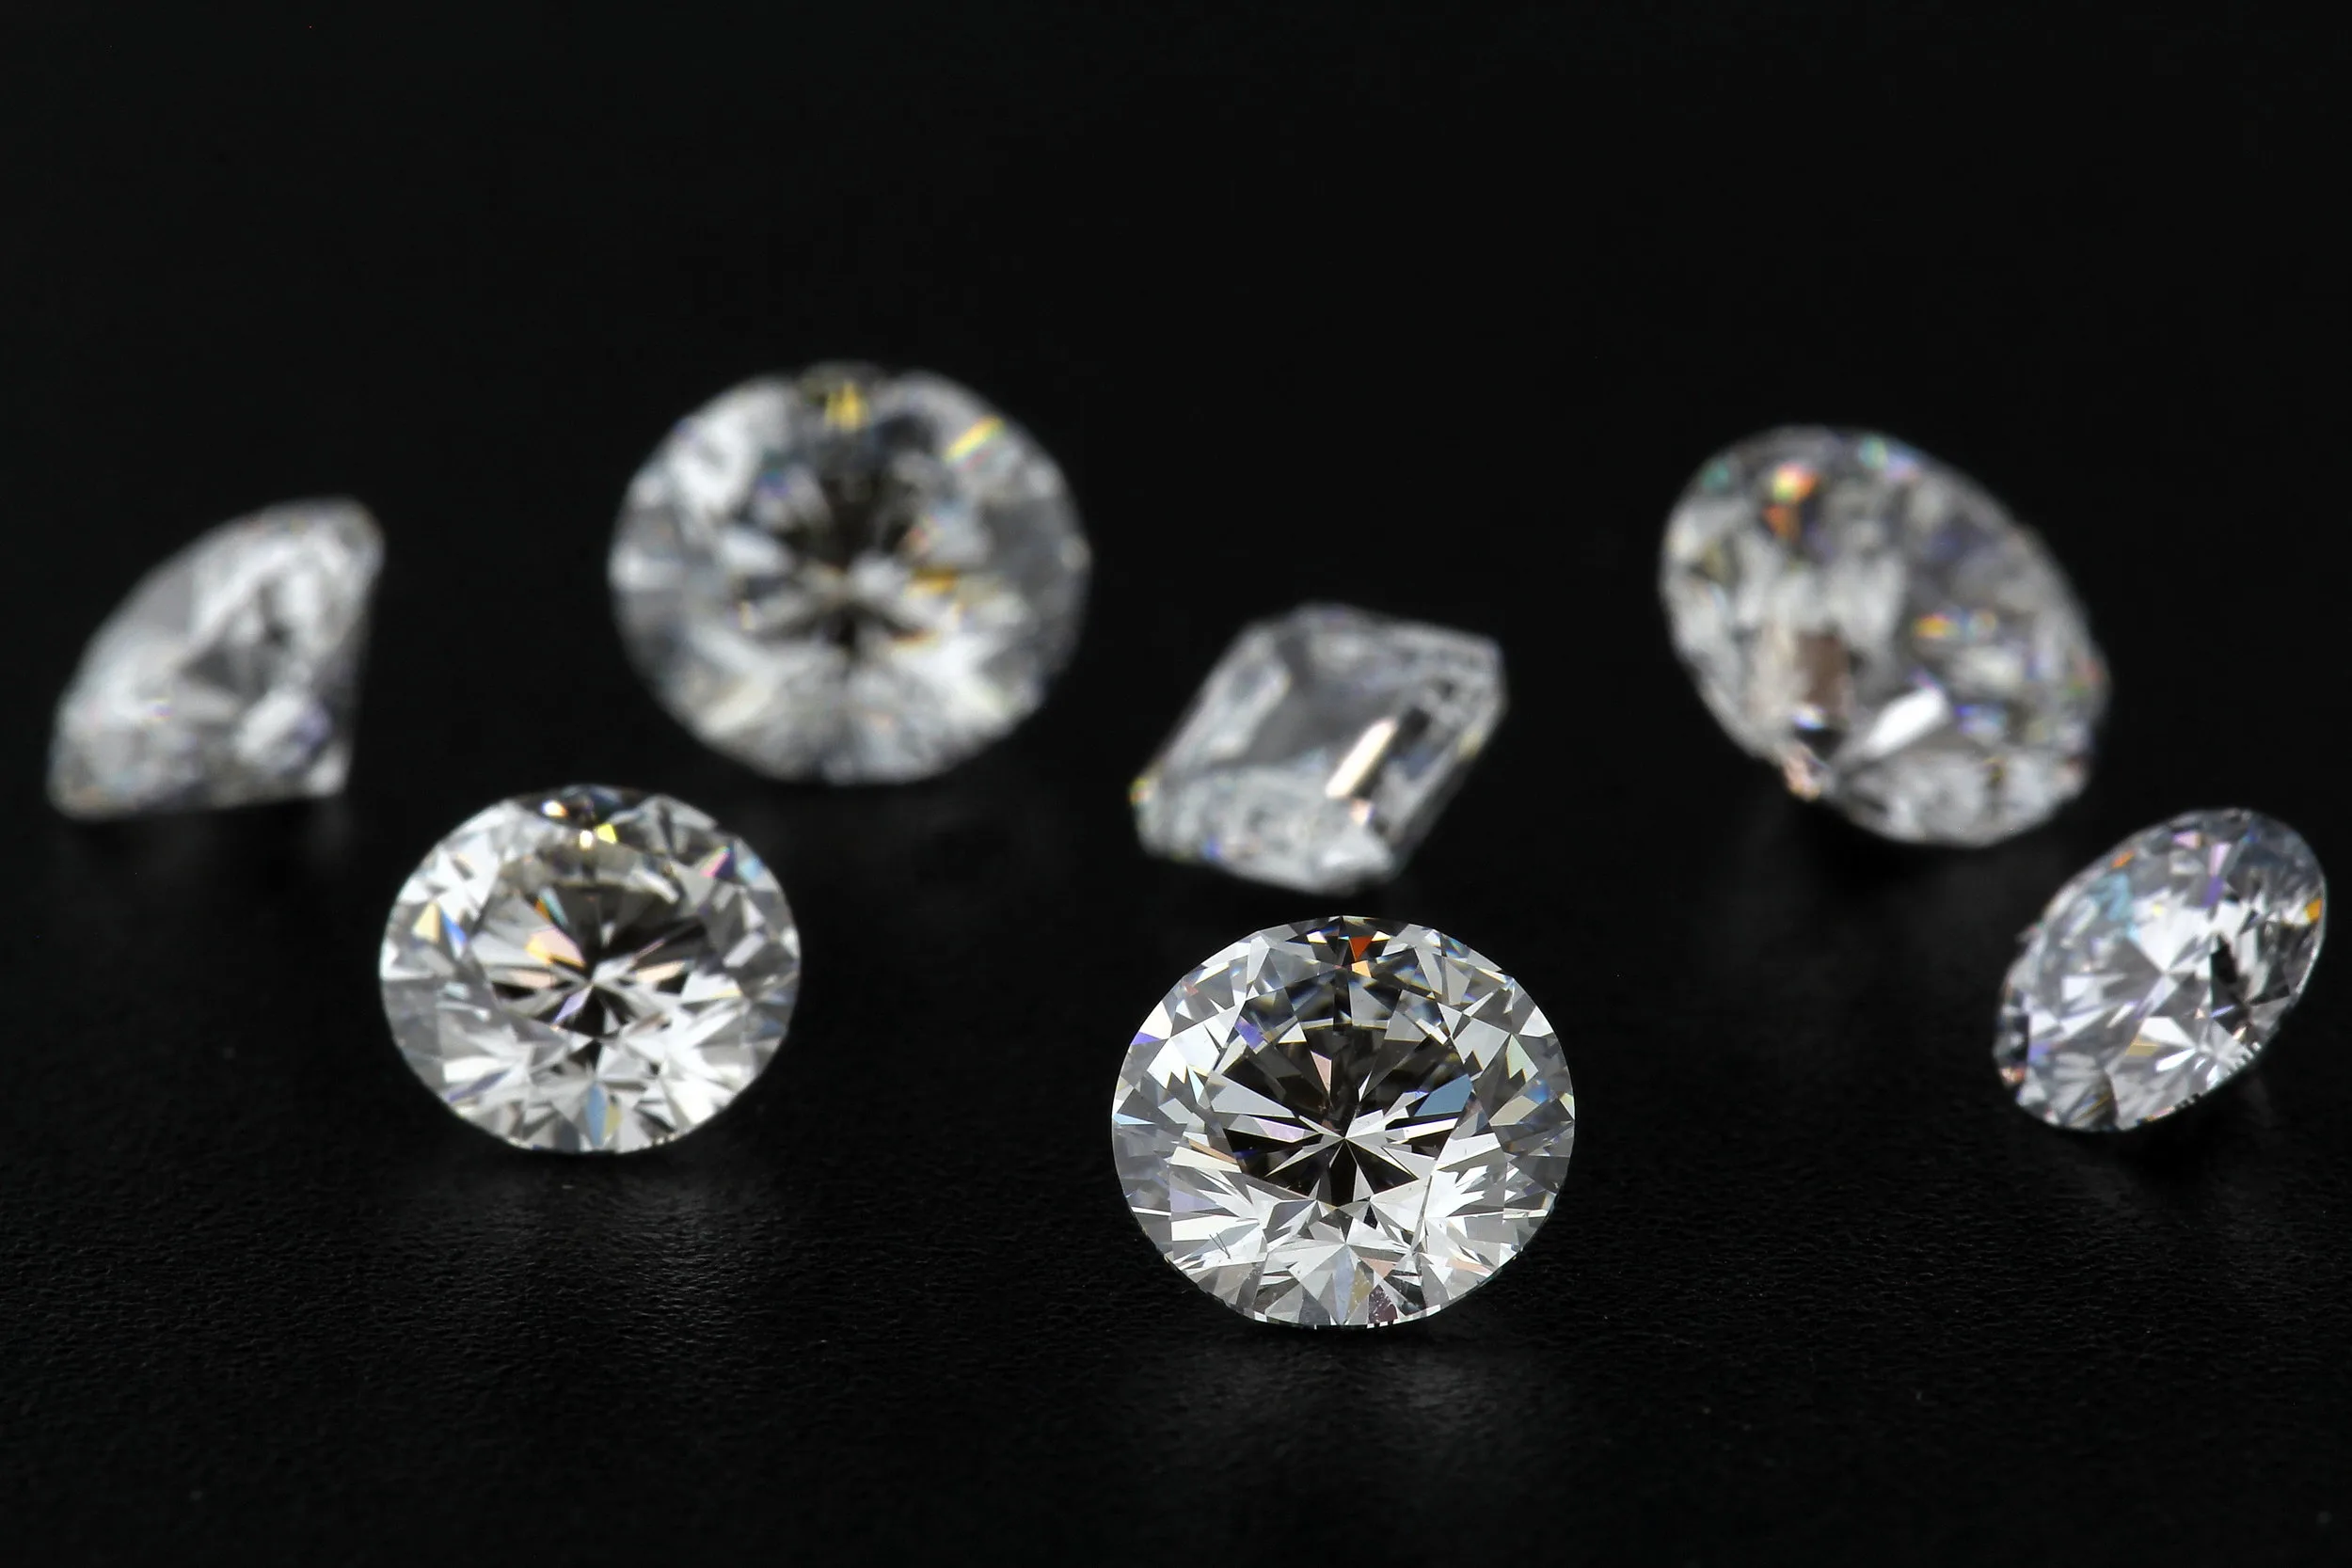 HOW IS A DIAMOND GROWN? By Replicating the Conditions Within the Earth in Which Carbon Crystallizes into Diamond